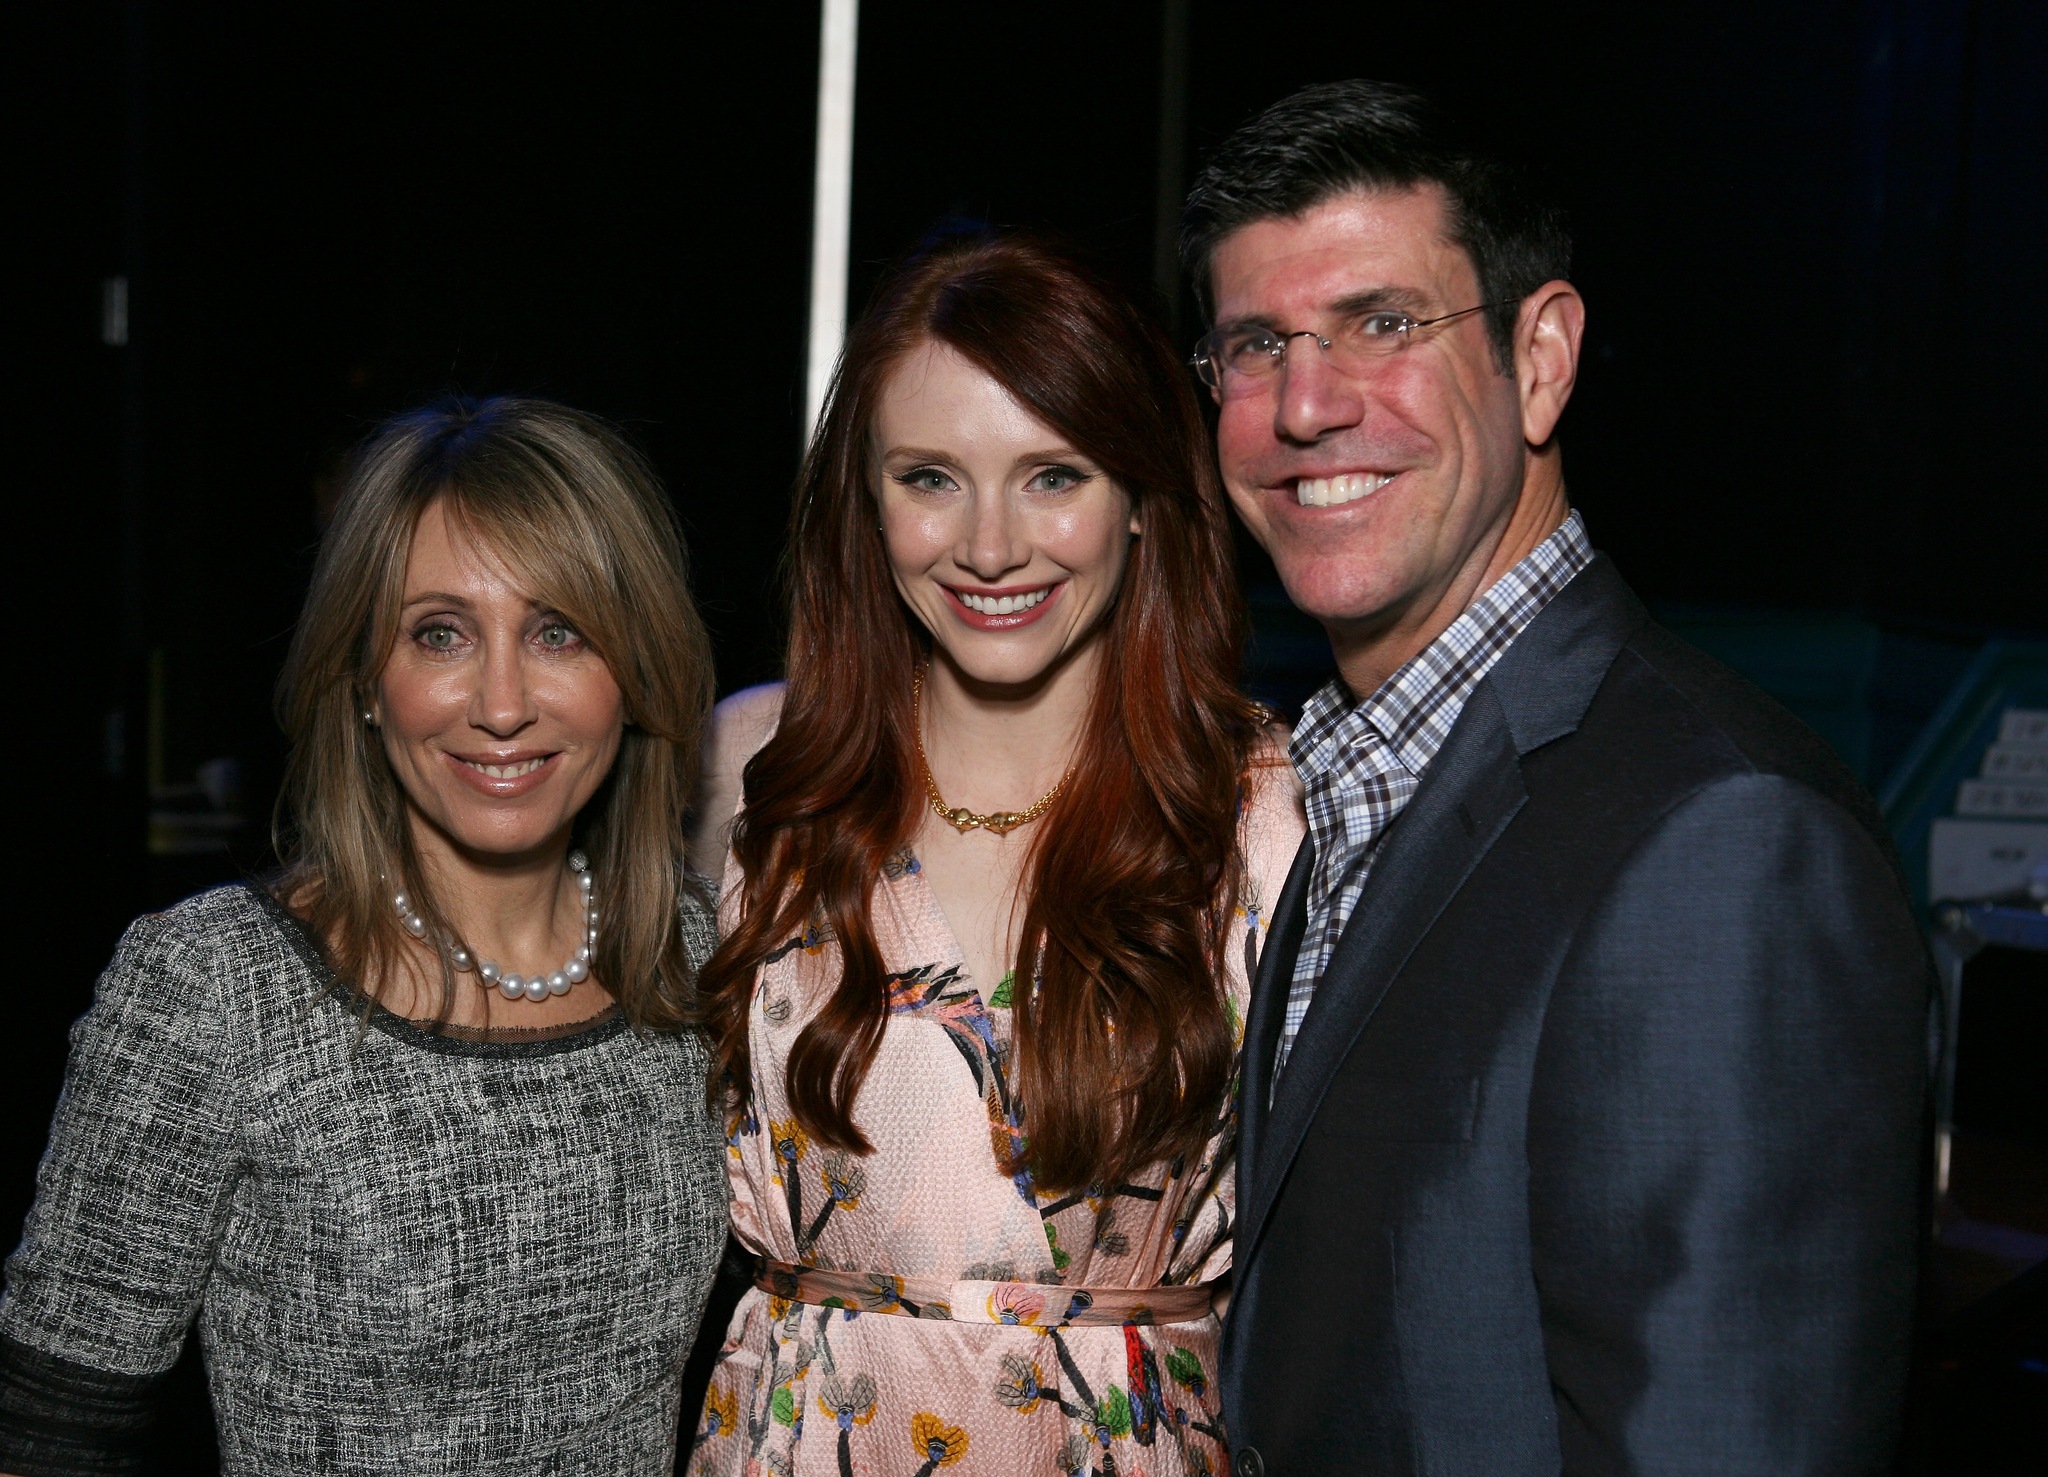 Bryce Dallas Howard, Rich Ross and Stacey Snider